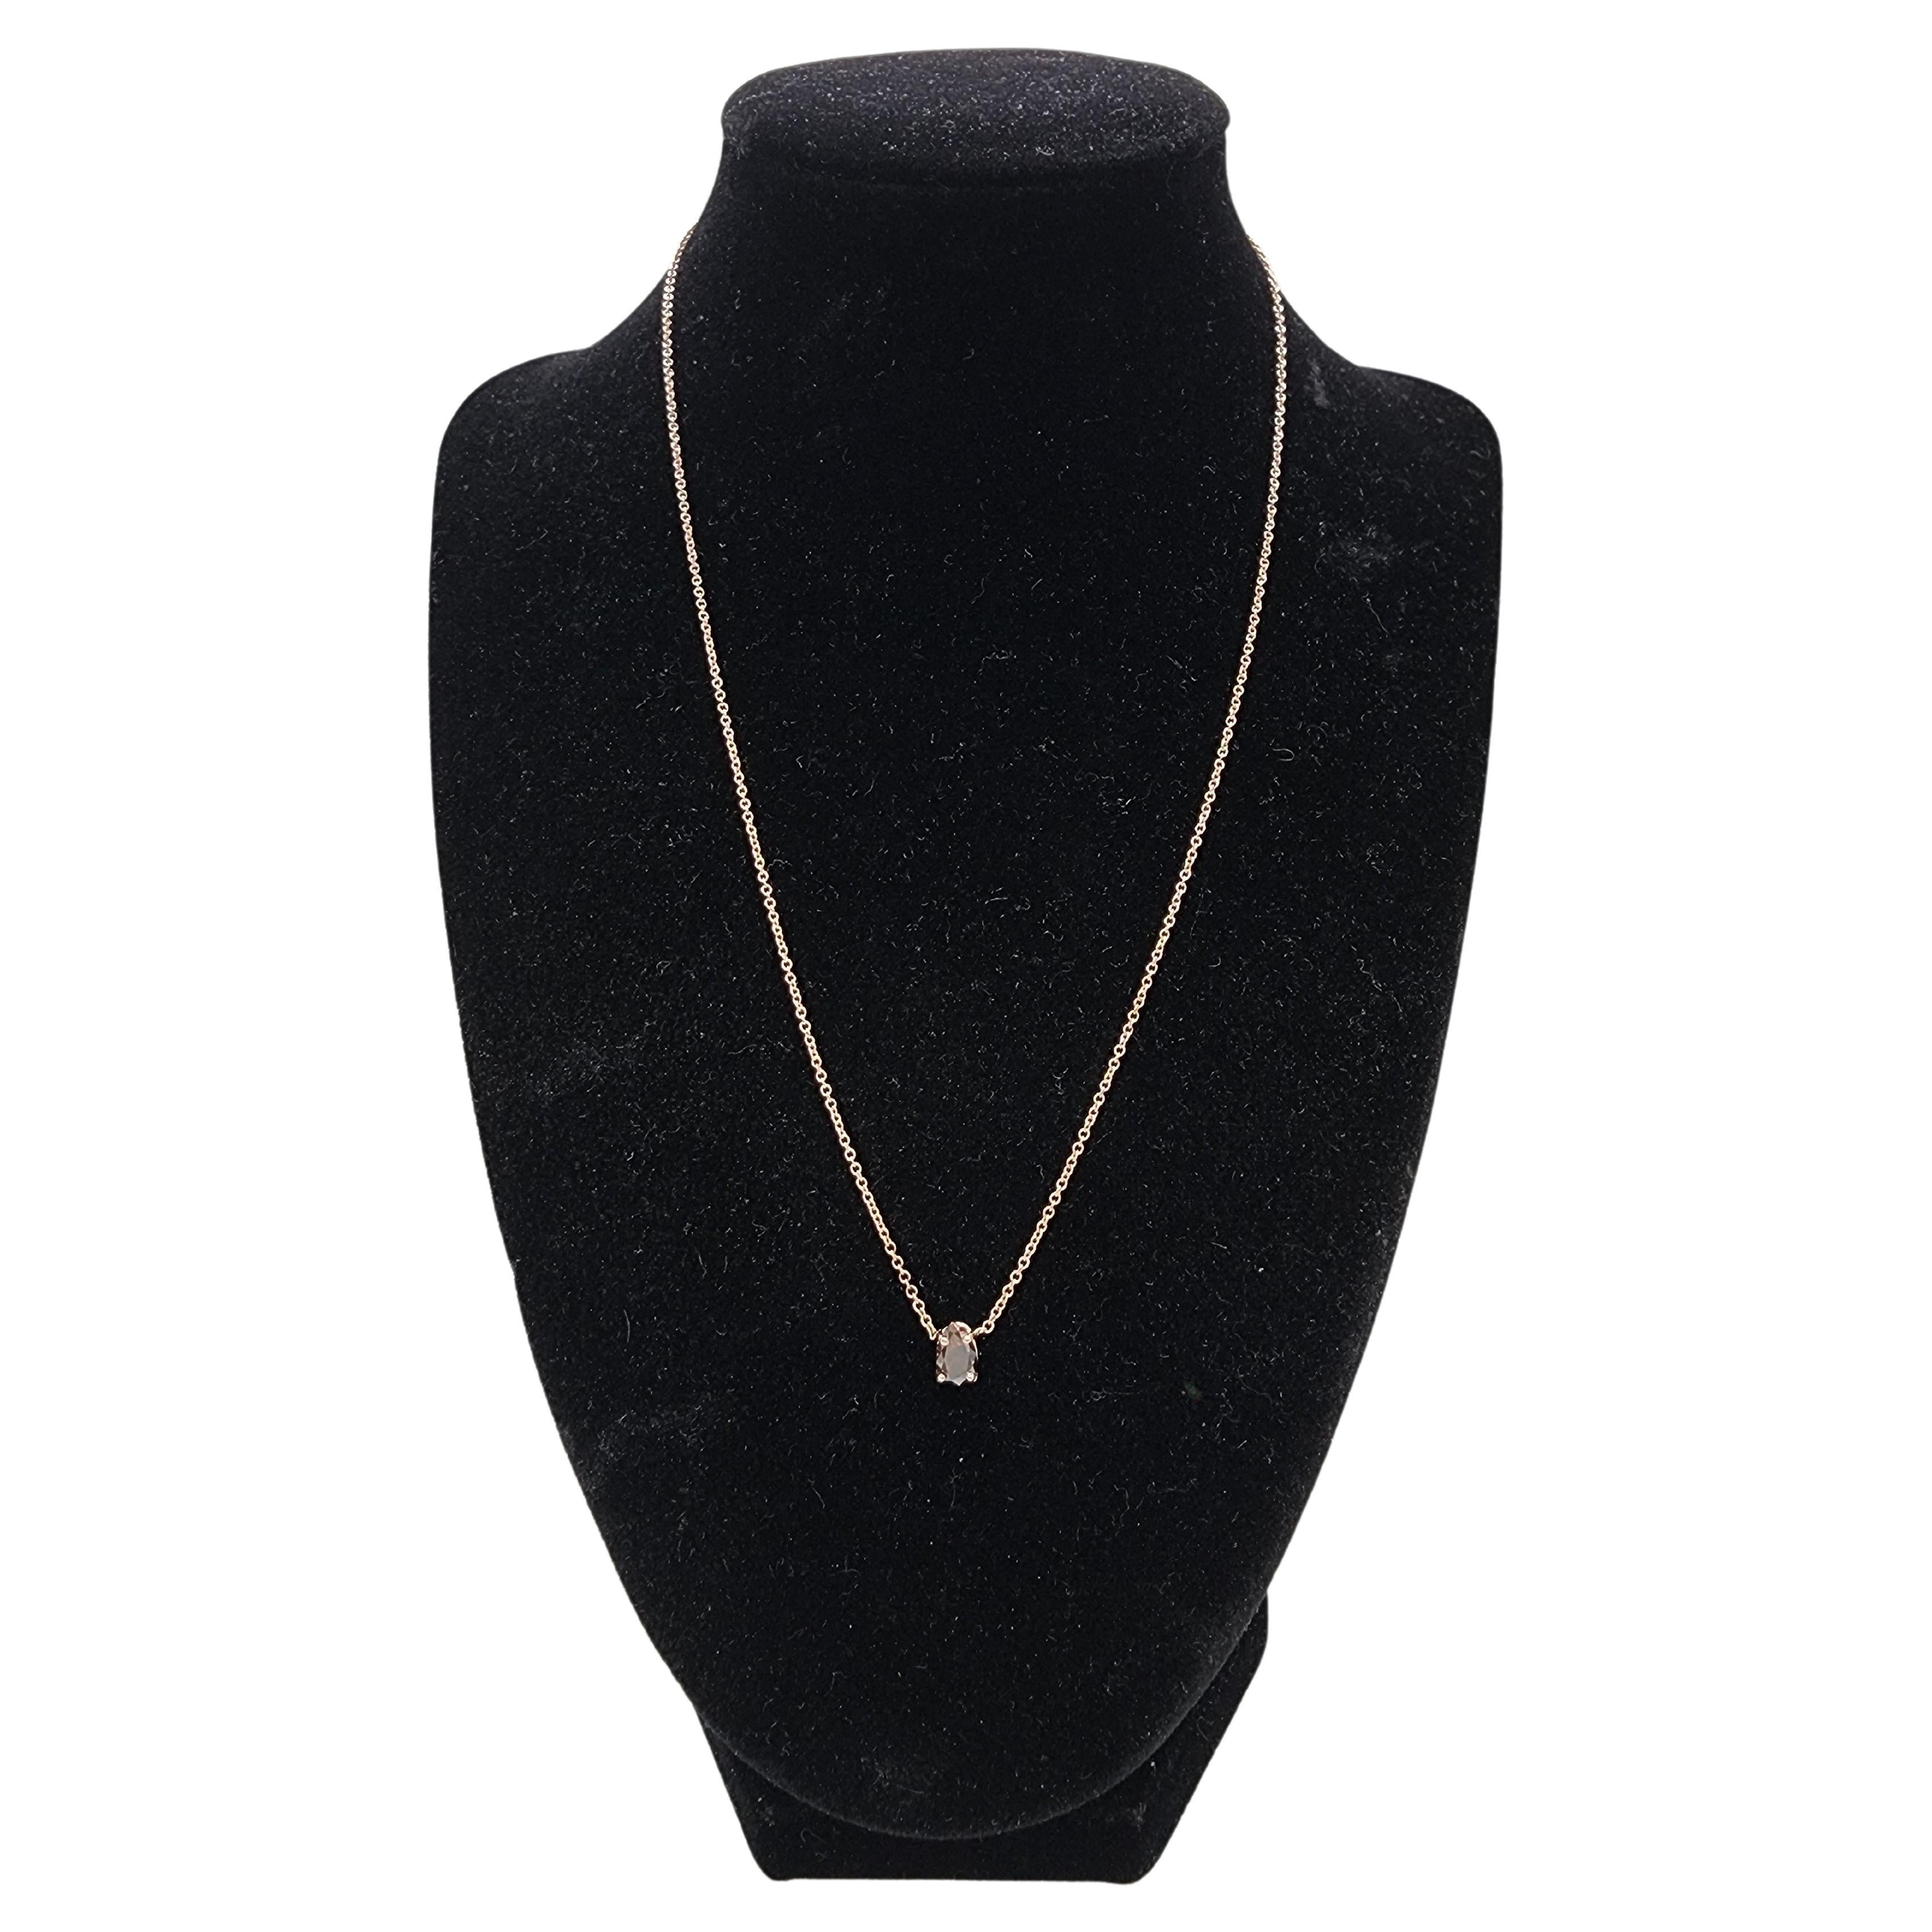 GIA 0.69 Carats Fancy Dark Brown Natural Diamond Pear Shape Pendant Rose Gold 14 Karat. Set in 14k rose gold pendant. 
chain measures 18 inch. easily adjustable to 16 inch with the attached extra loop.